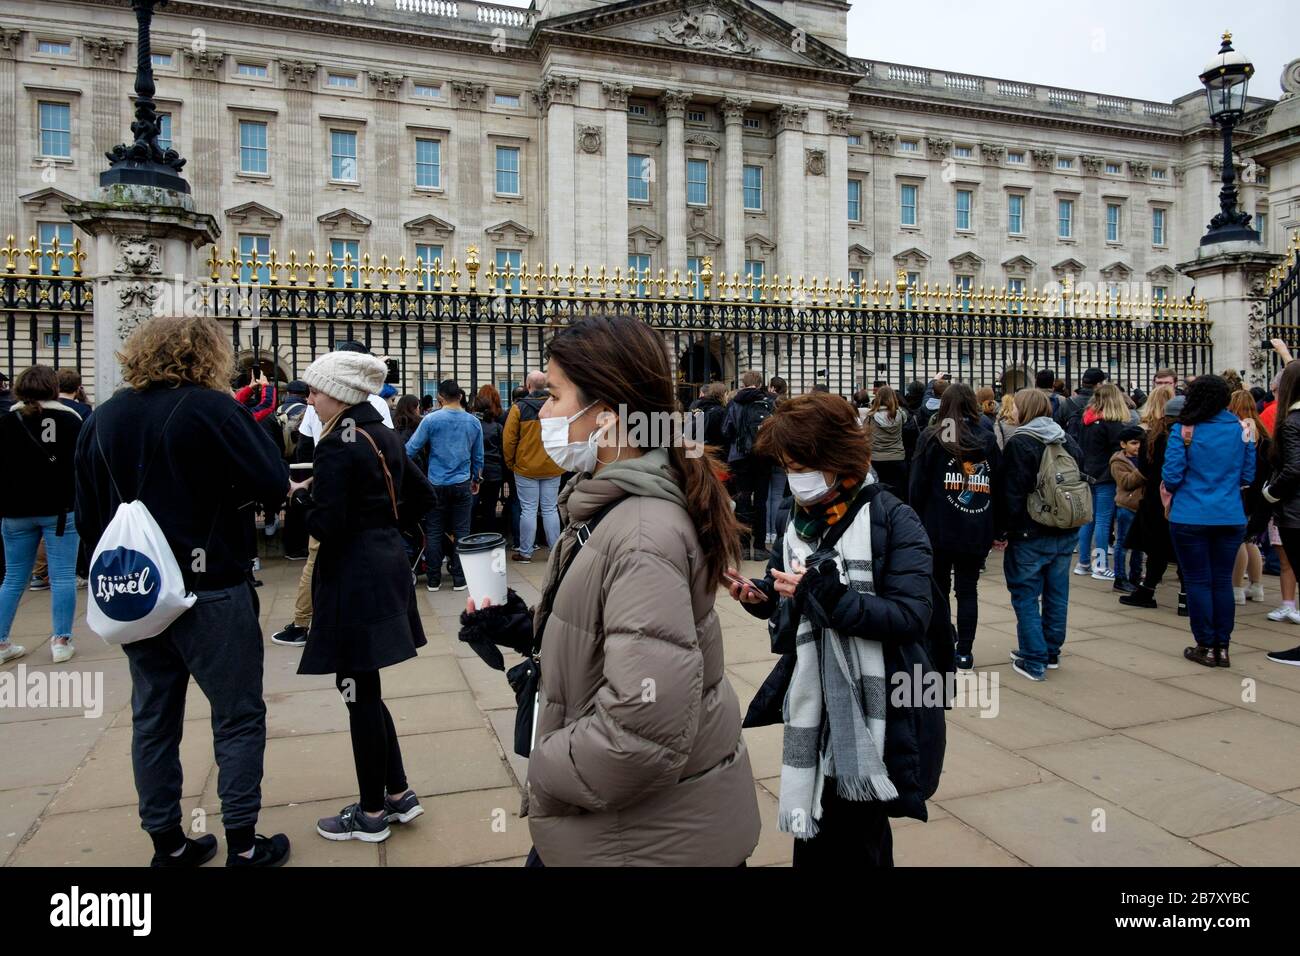 London, UK 18 March 2020. Visitors to London continue to gather at Buckingham Palace to watch the Changing of the Guard Ceremony despite concerns over Covid-19 and mass gatherings. Stock Photo